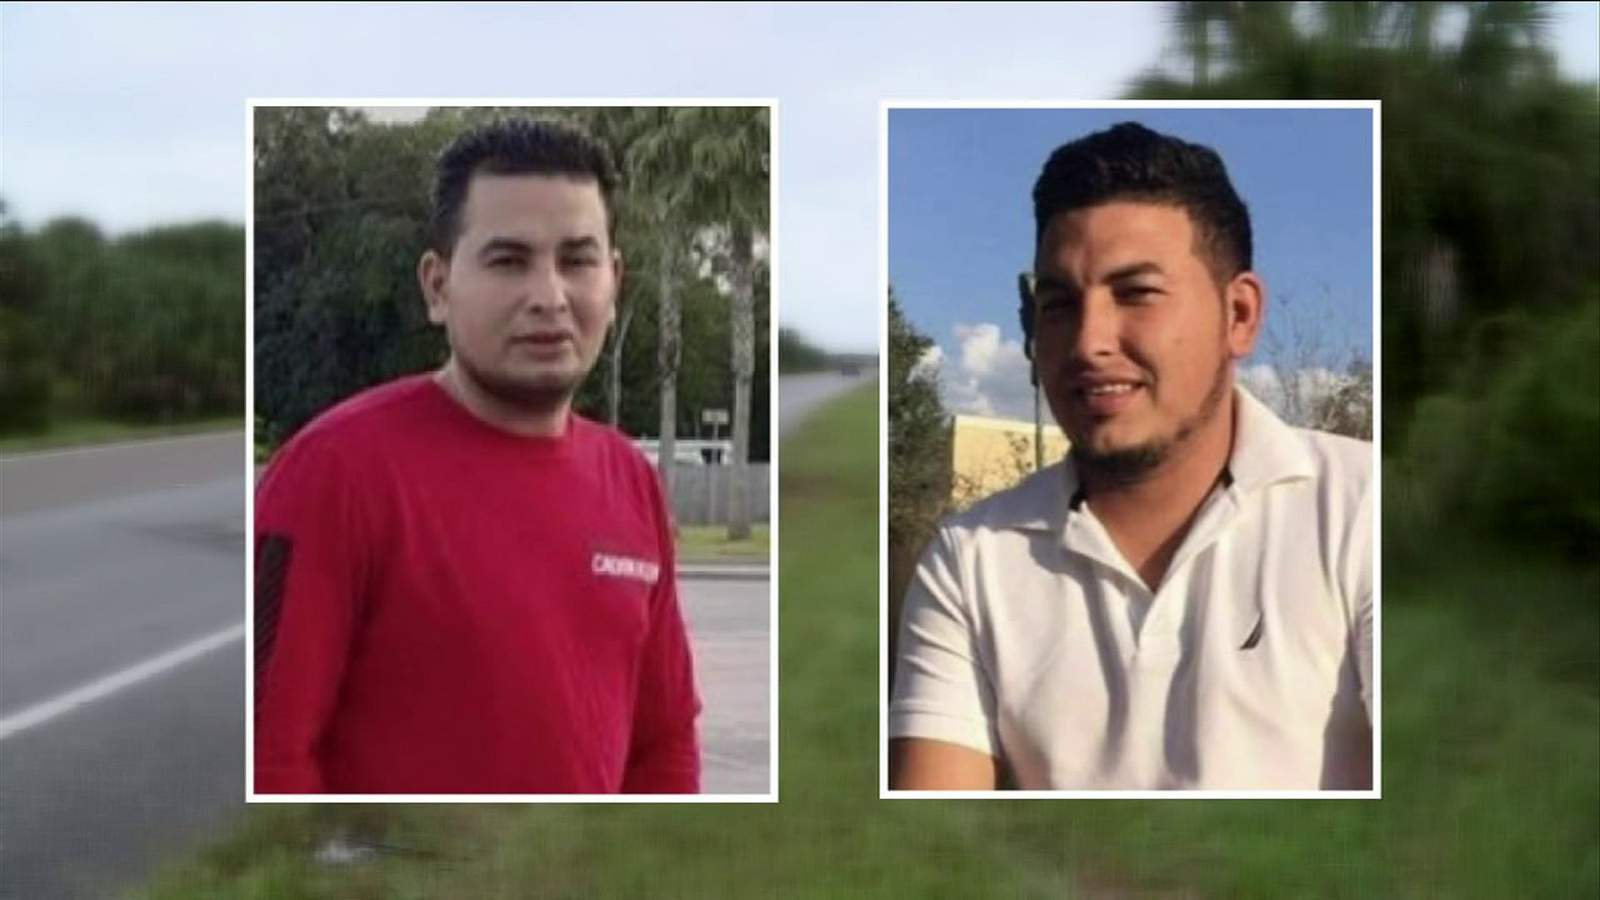 Brothers among 3 killed in hydroplane crash on Heckscher Drive, family says